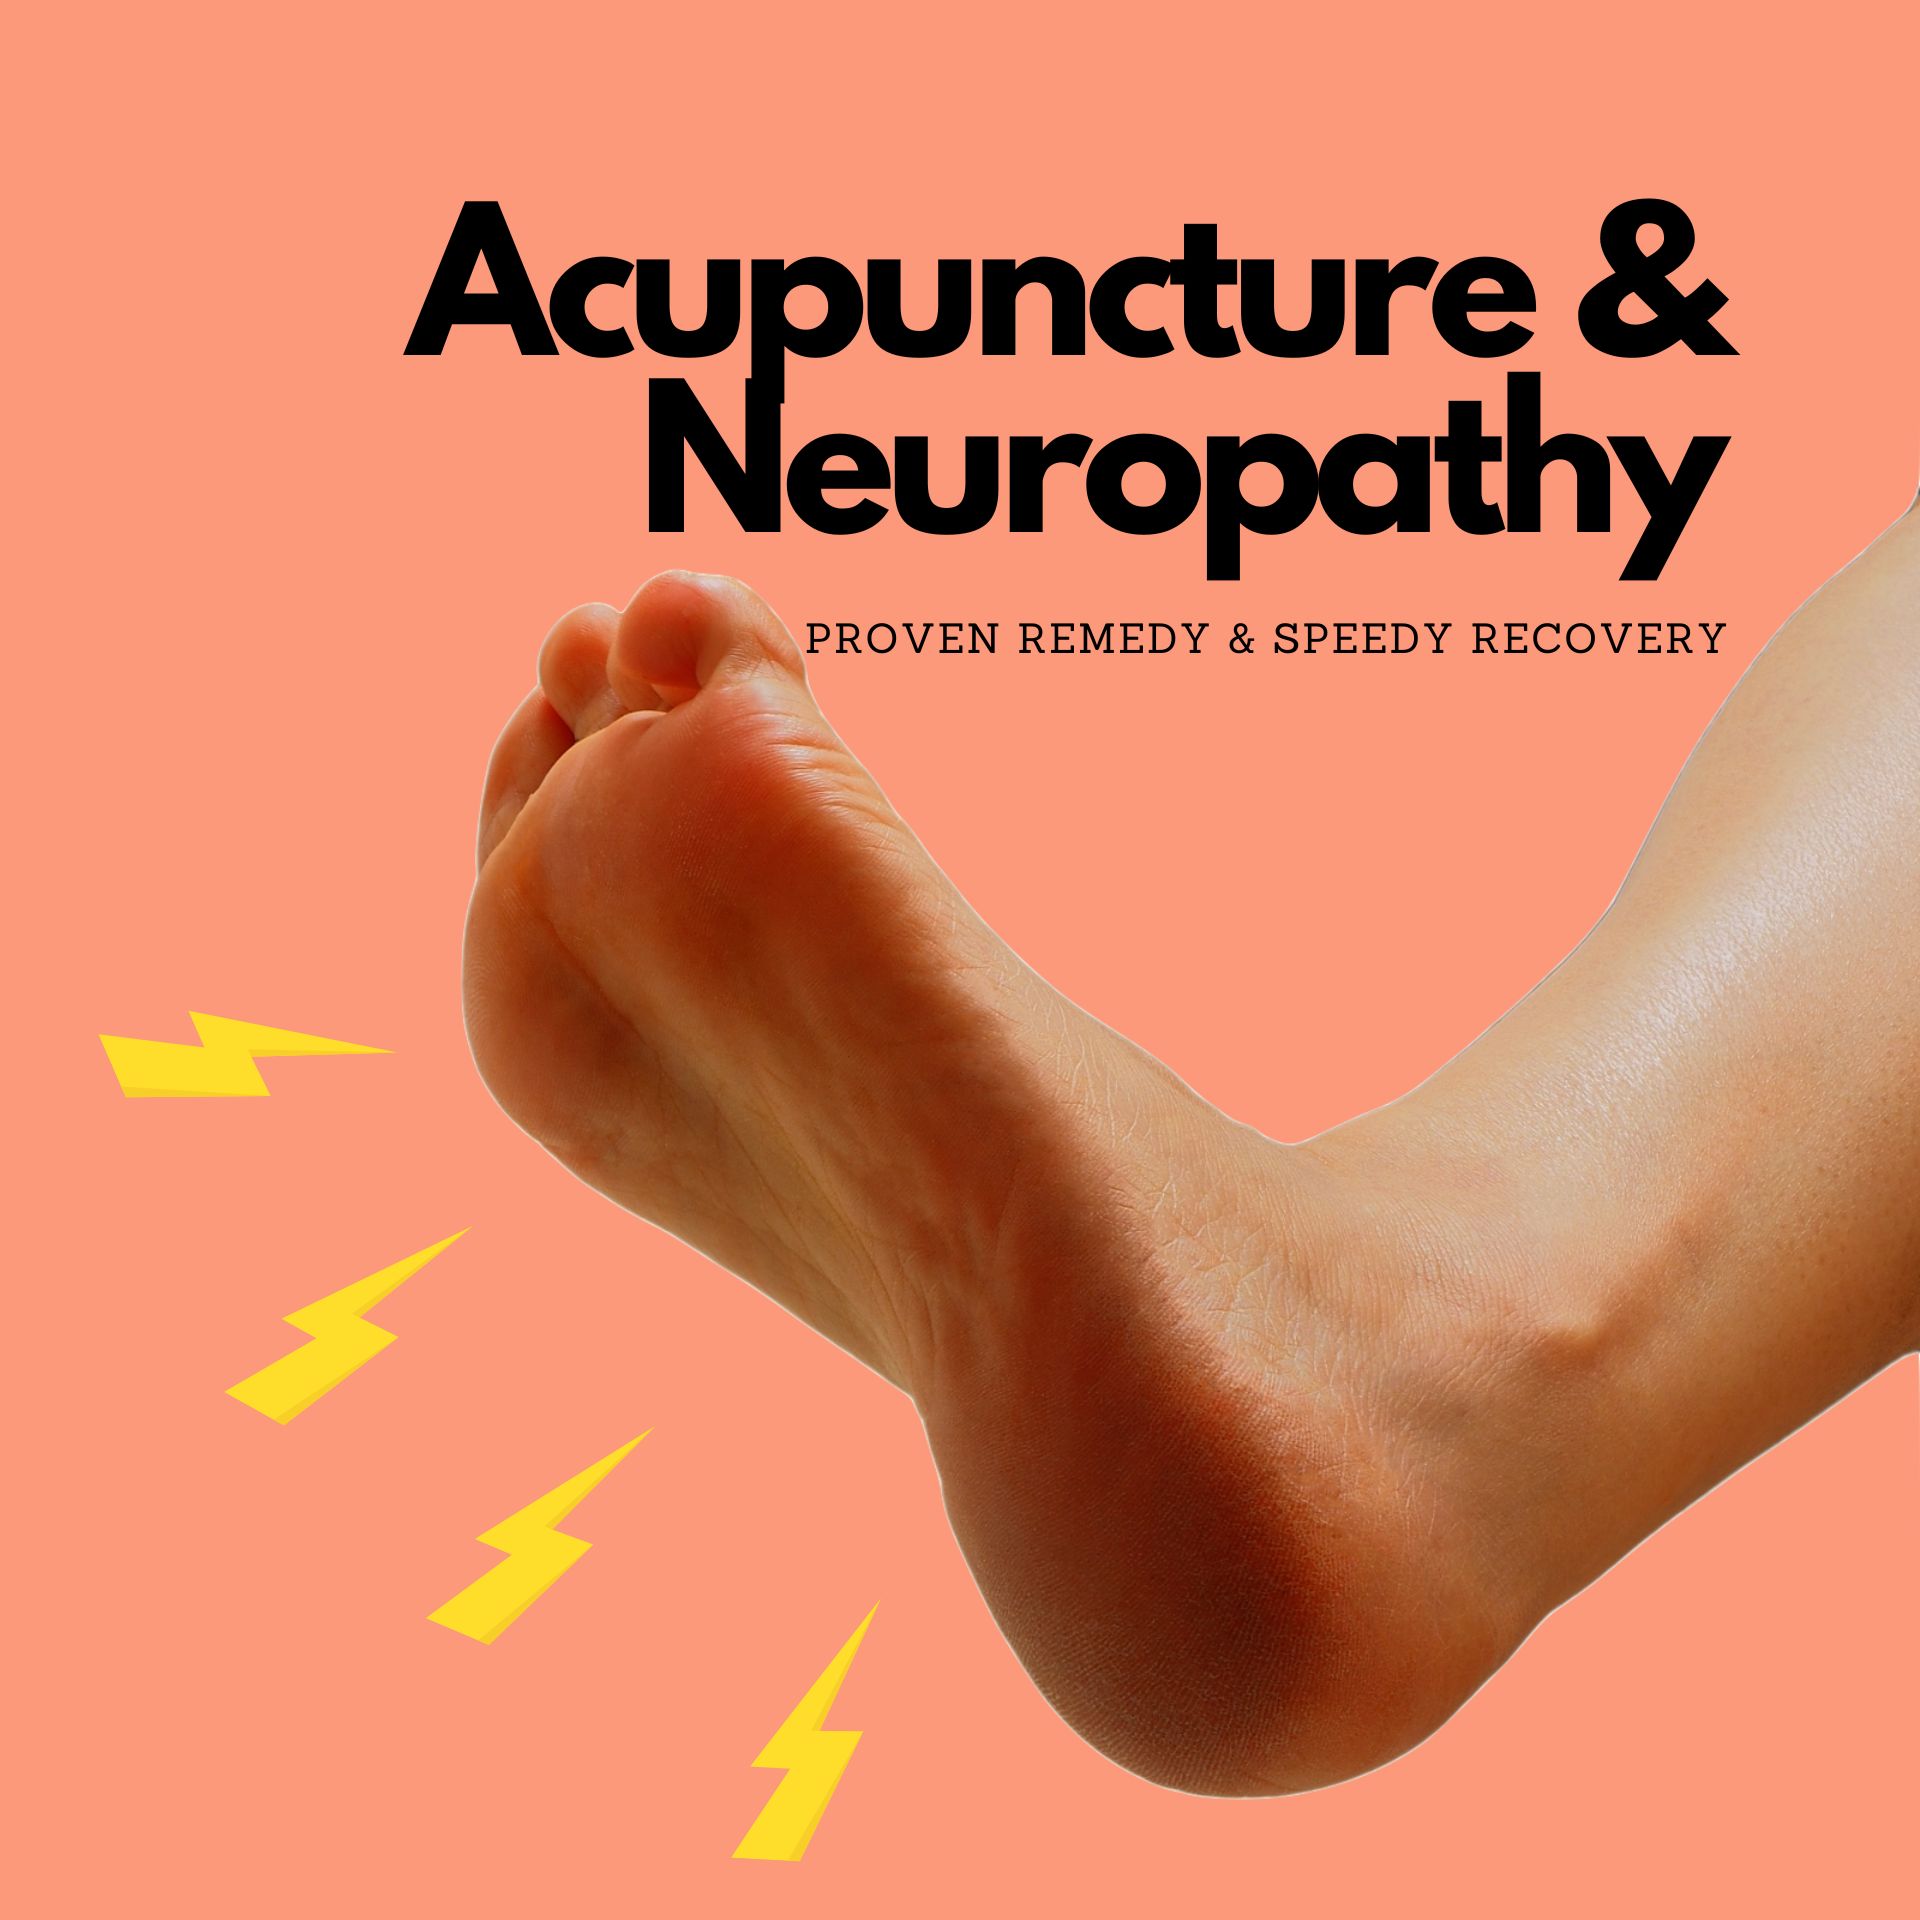 Acupuncture & Neuropathy